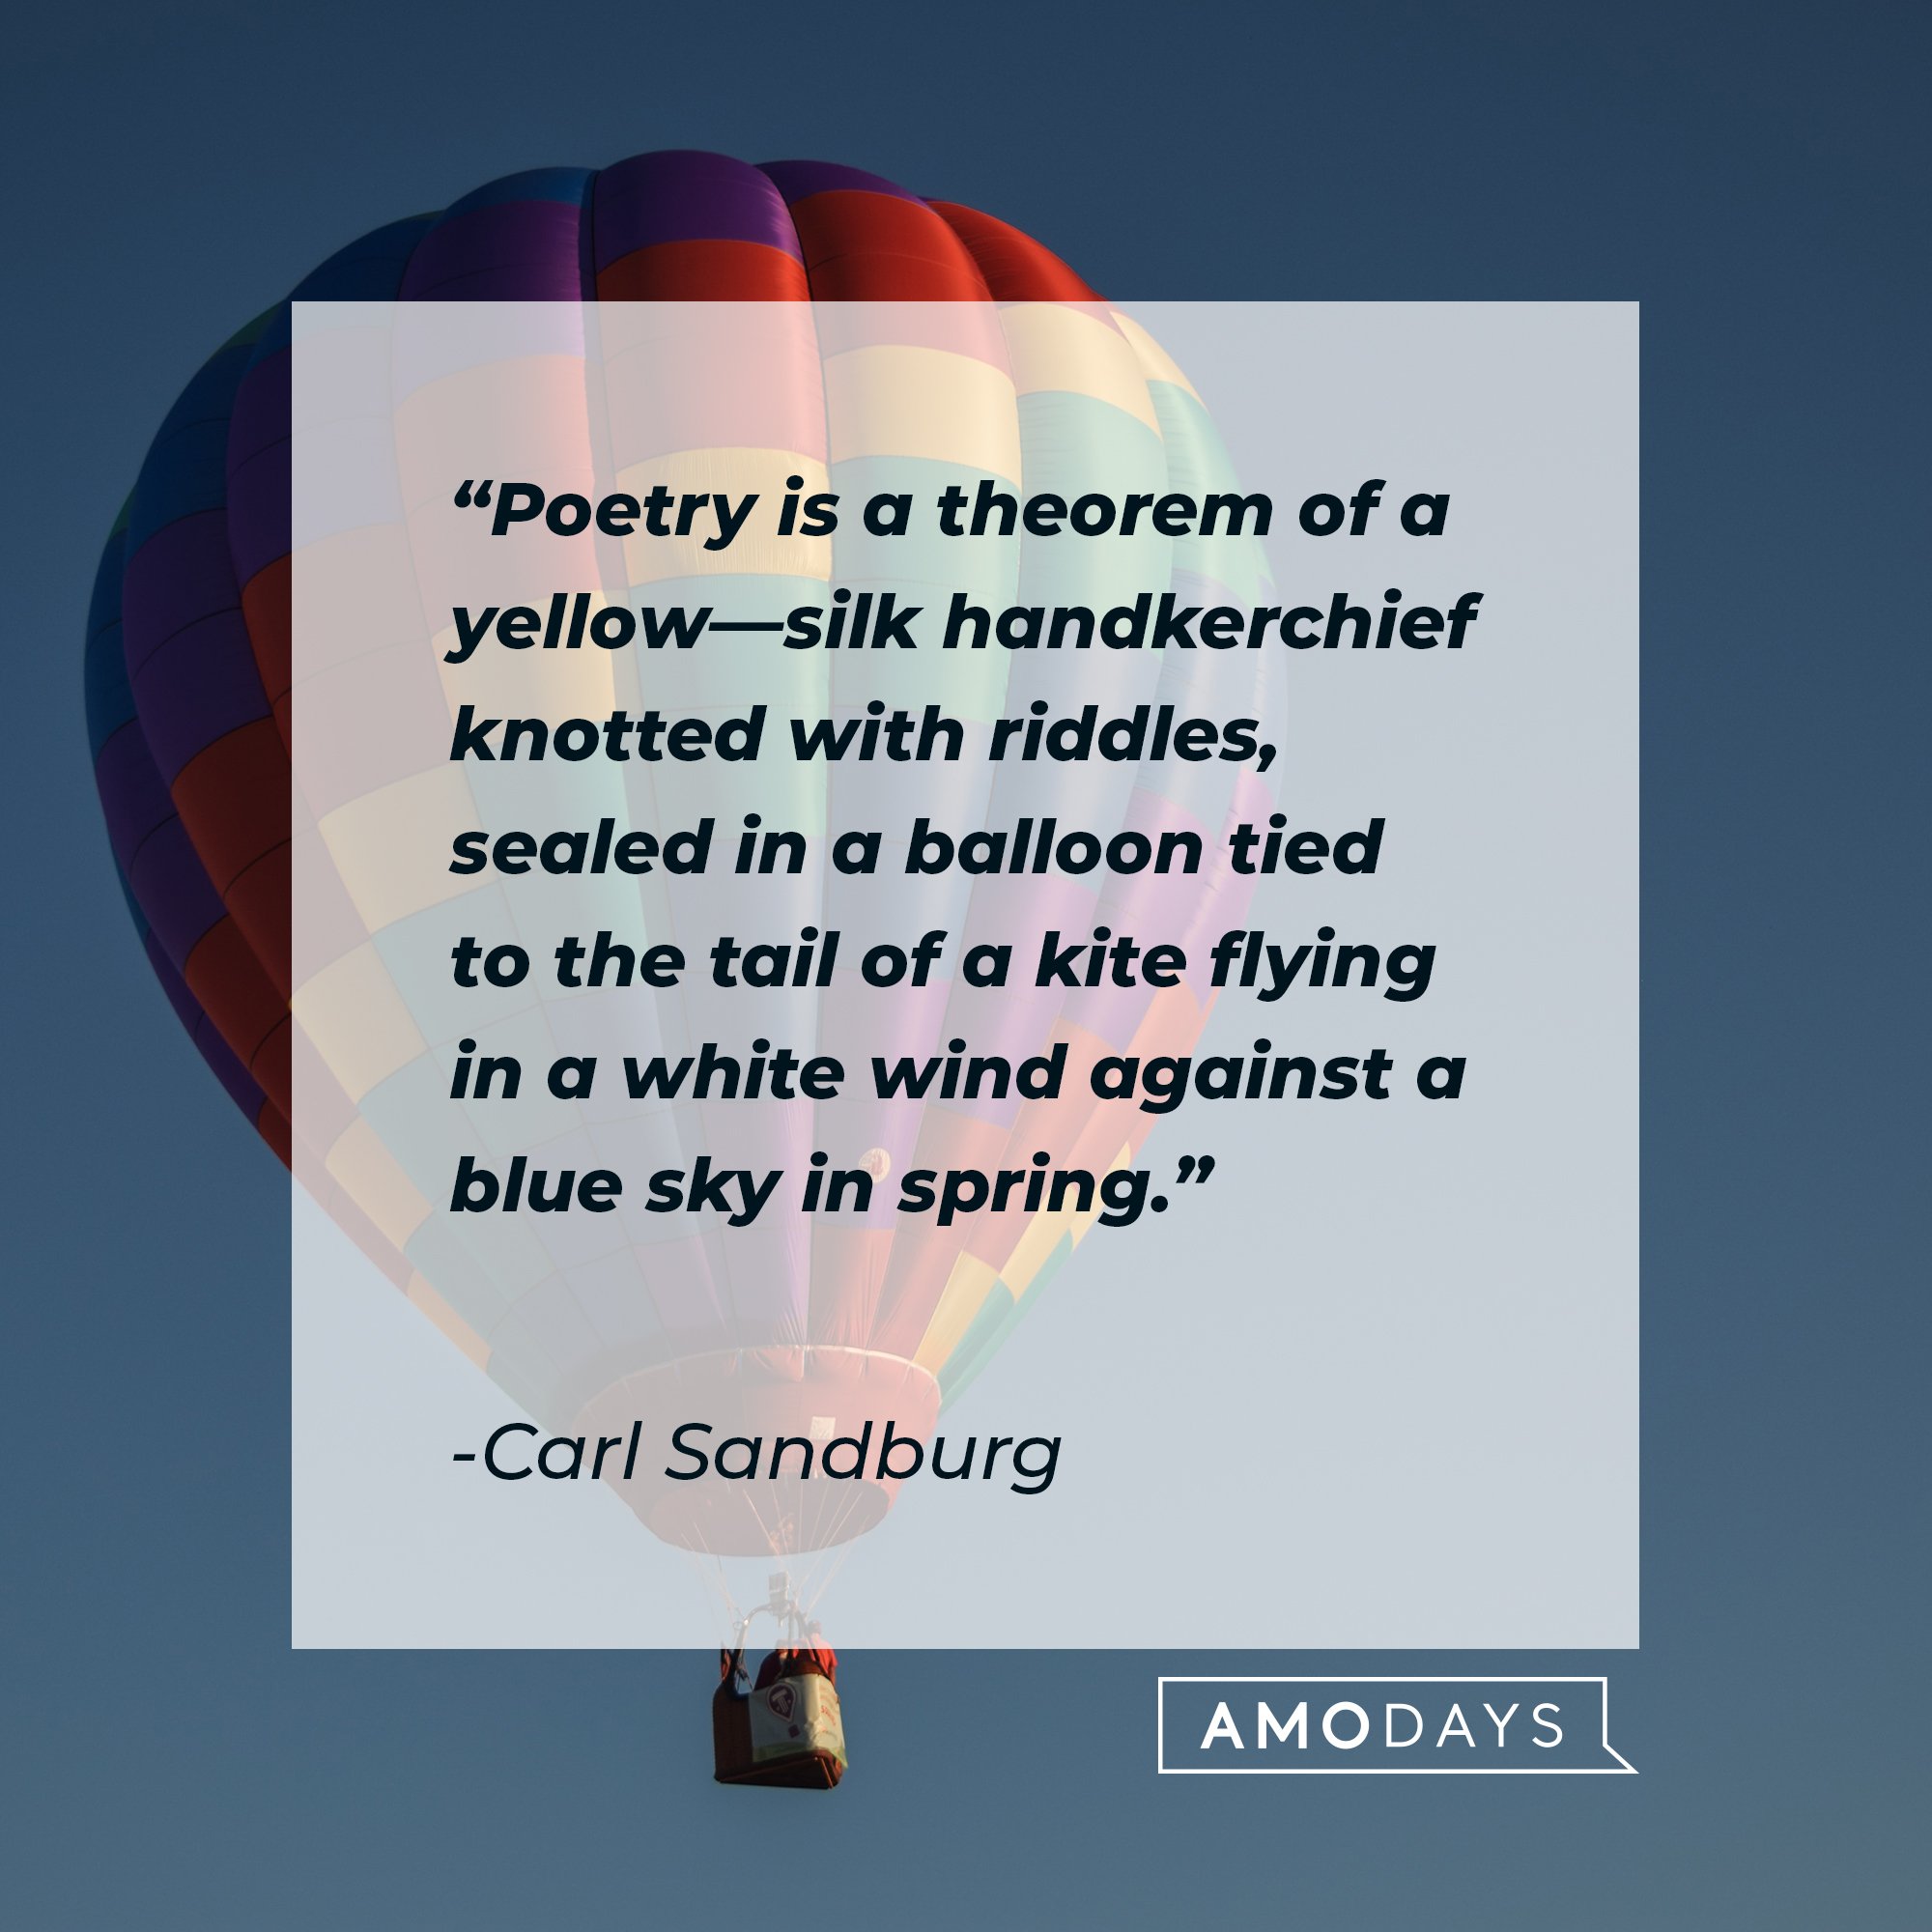 Carl Sandburg’s quote: "Poetry is a theorem of a yellow—silk handkerchief knotted with riddles, sealed in a balloon tied to the tail of a kite flying in a white wind against a blue sky in spring."  | Image: AmoDays 